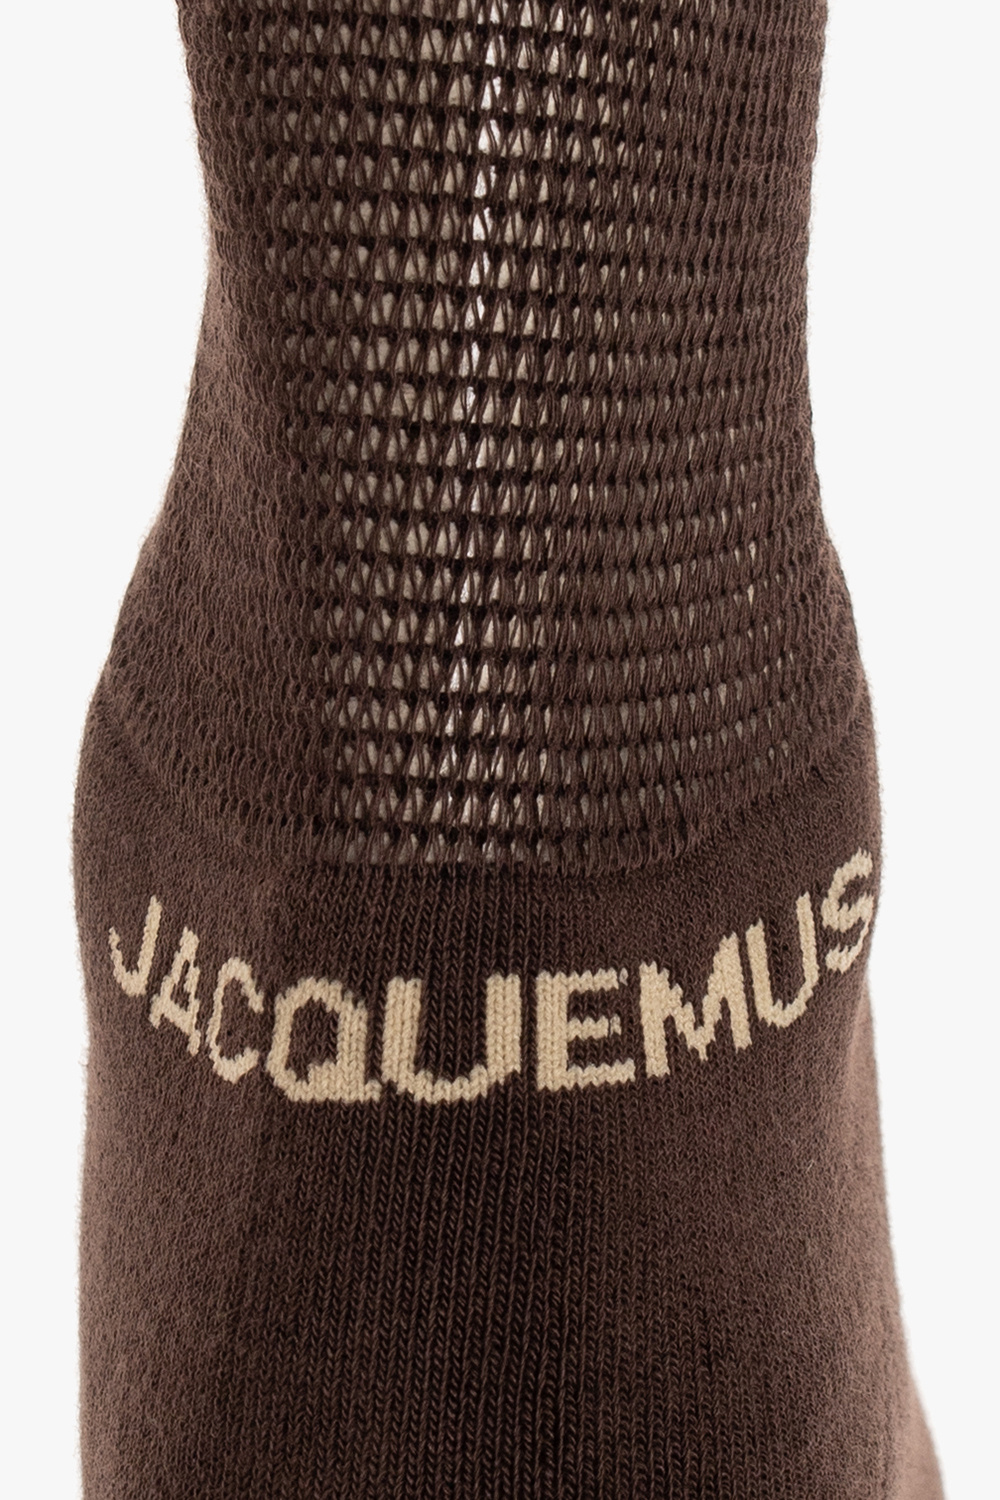 Jacquemus Baby 0-36 months